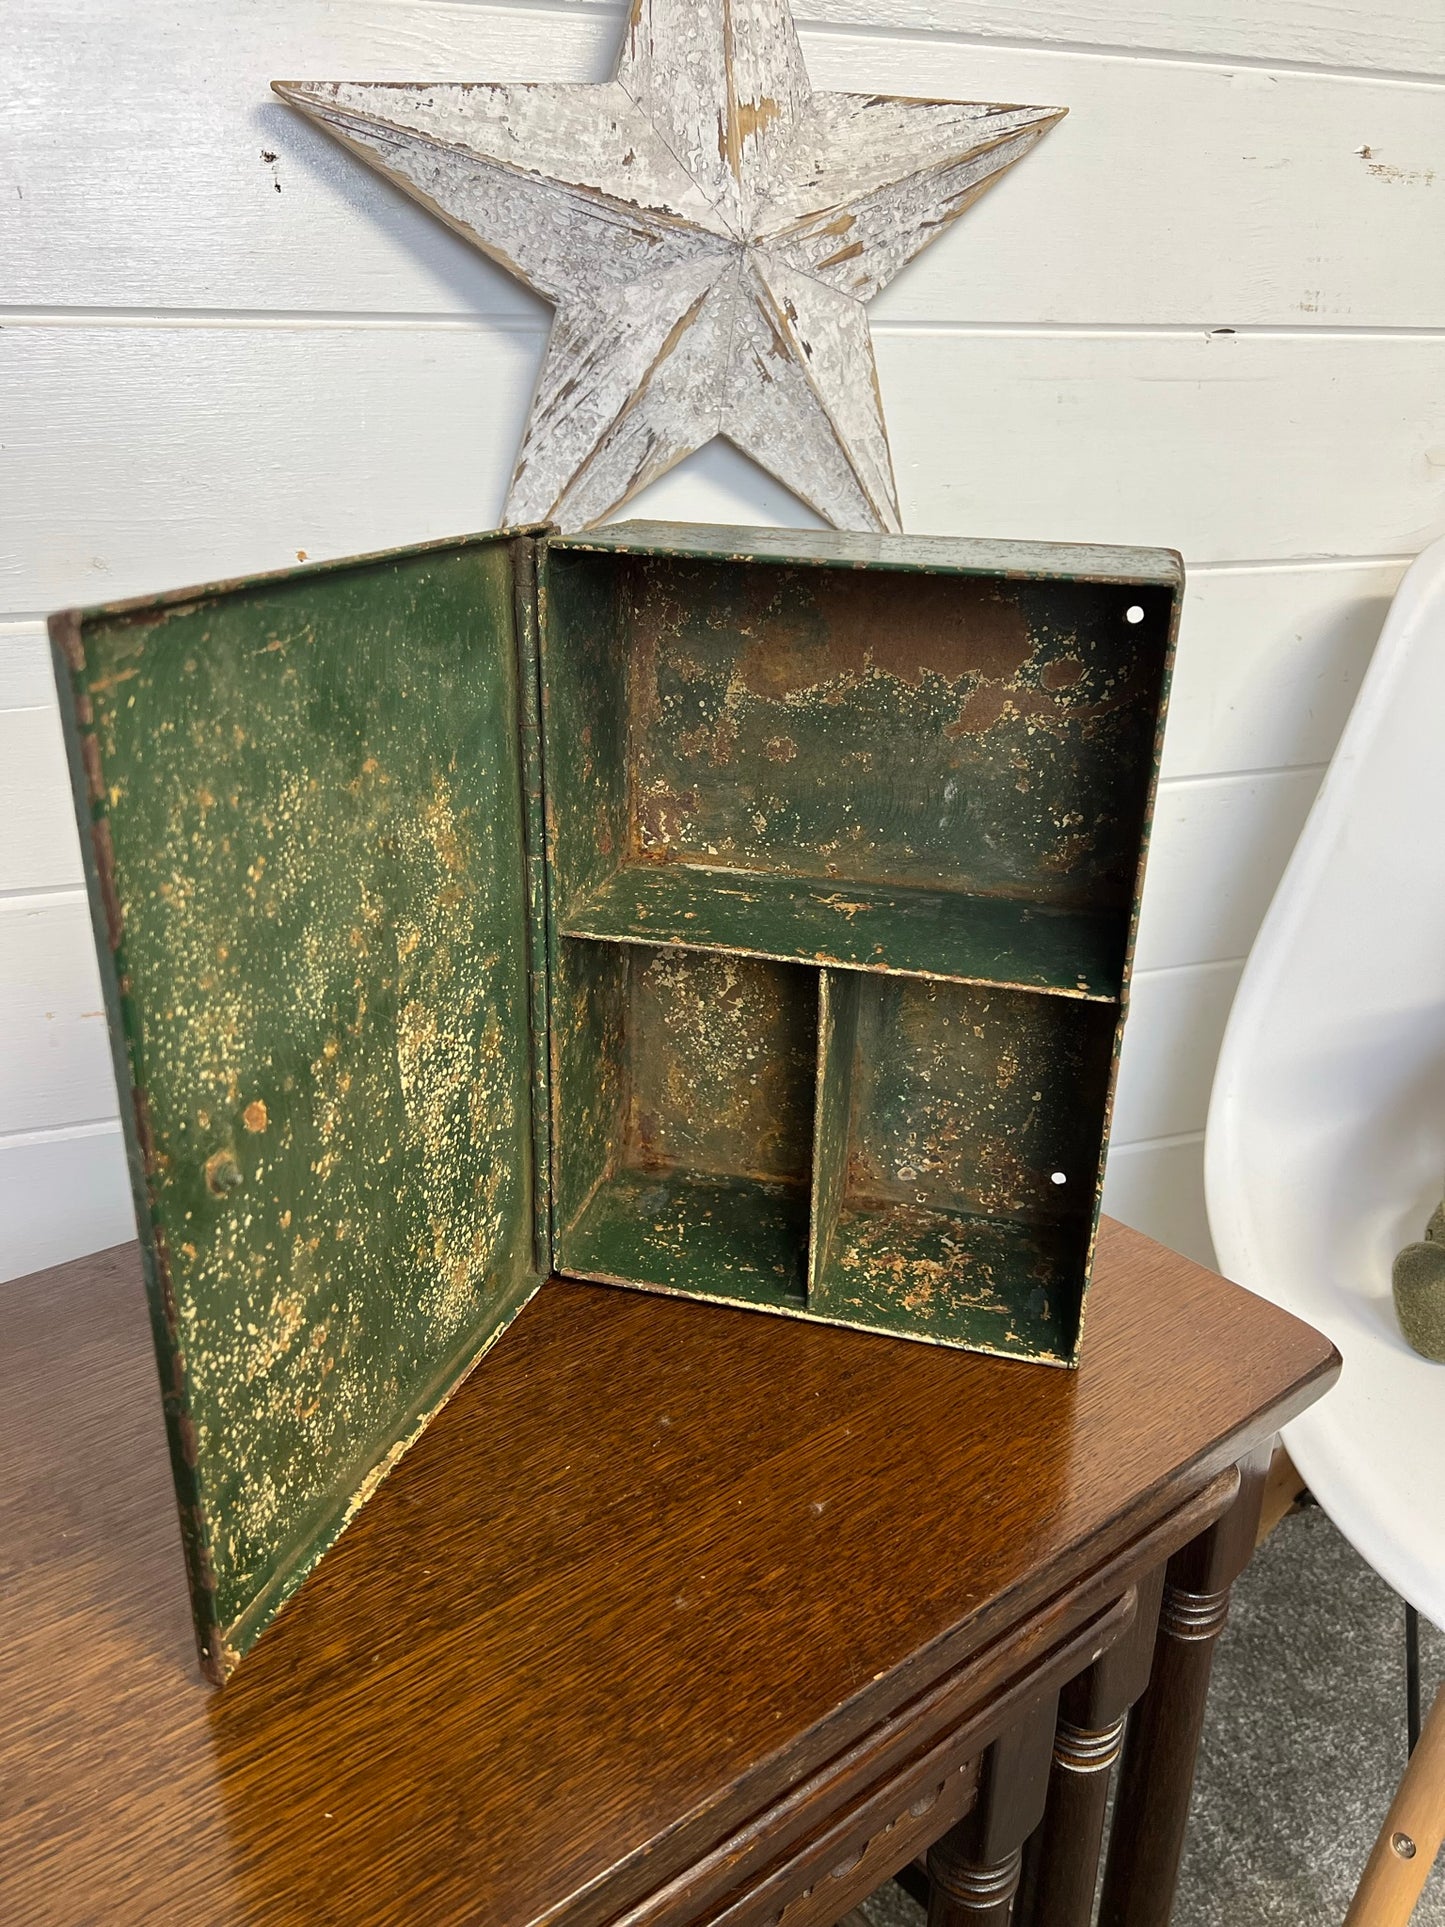 Vintage Metal Wall Box Tool Storage Small Cabinet Vintage Reclaimed Rustic Patina